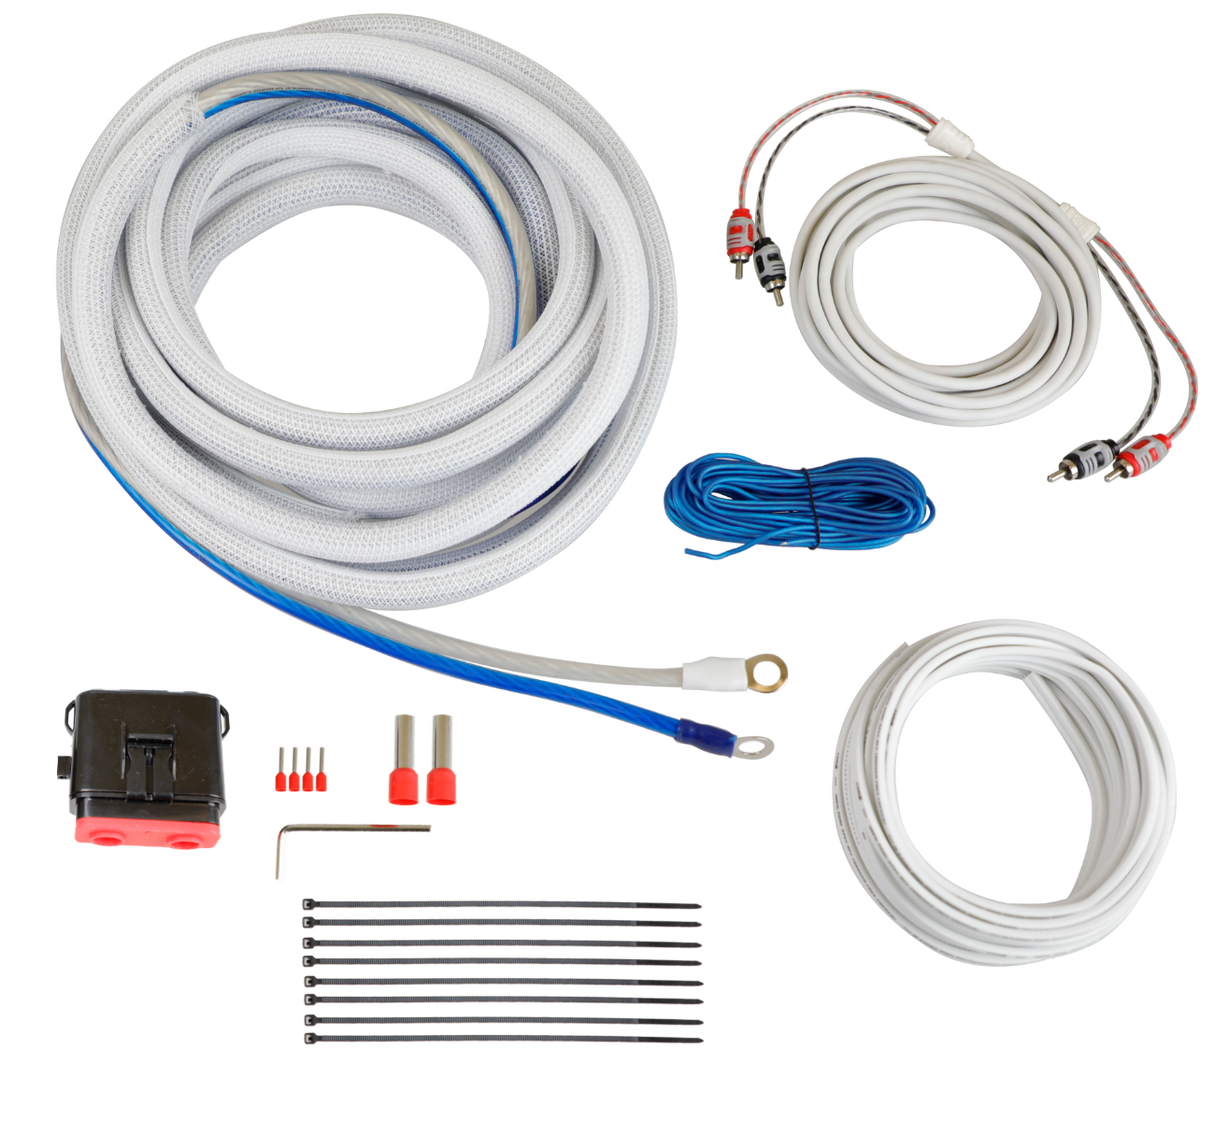 CAKM42 - 4 Gauge Complete Waterproof Amp Kit, 20ft. with RCA, Speaker Cable